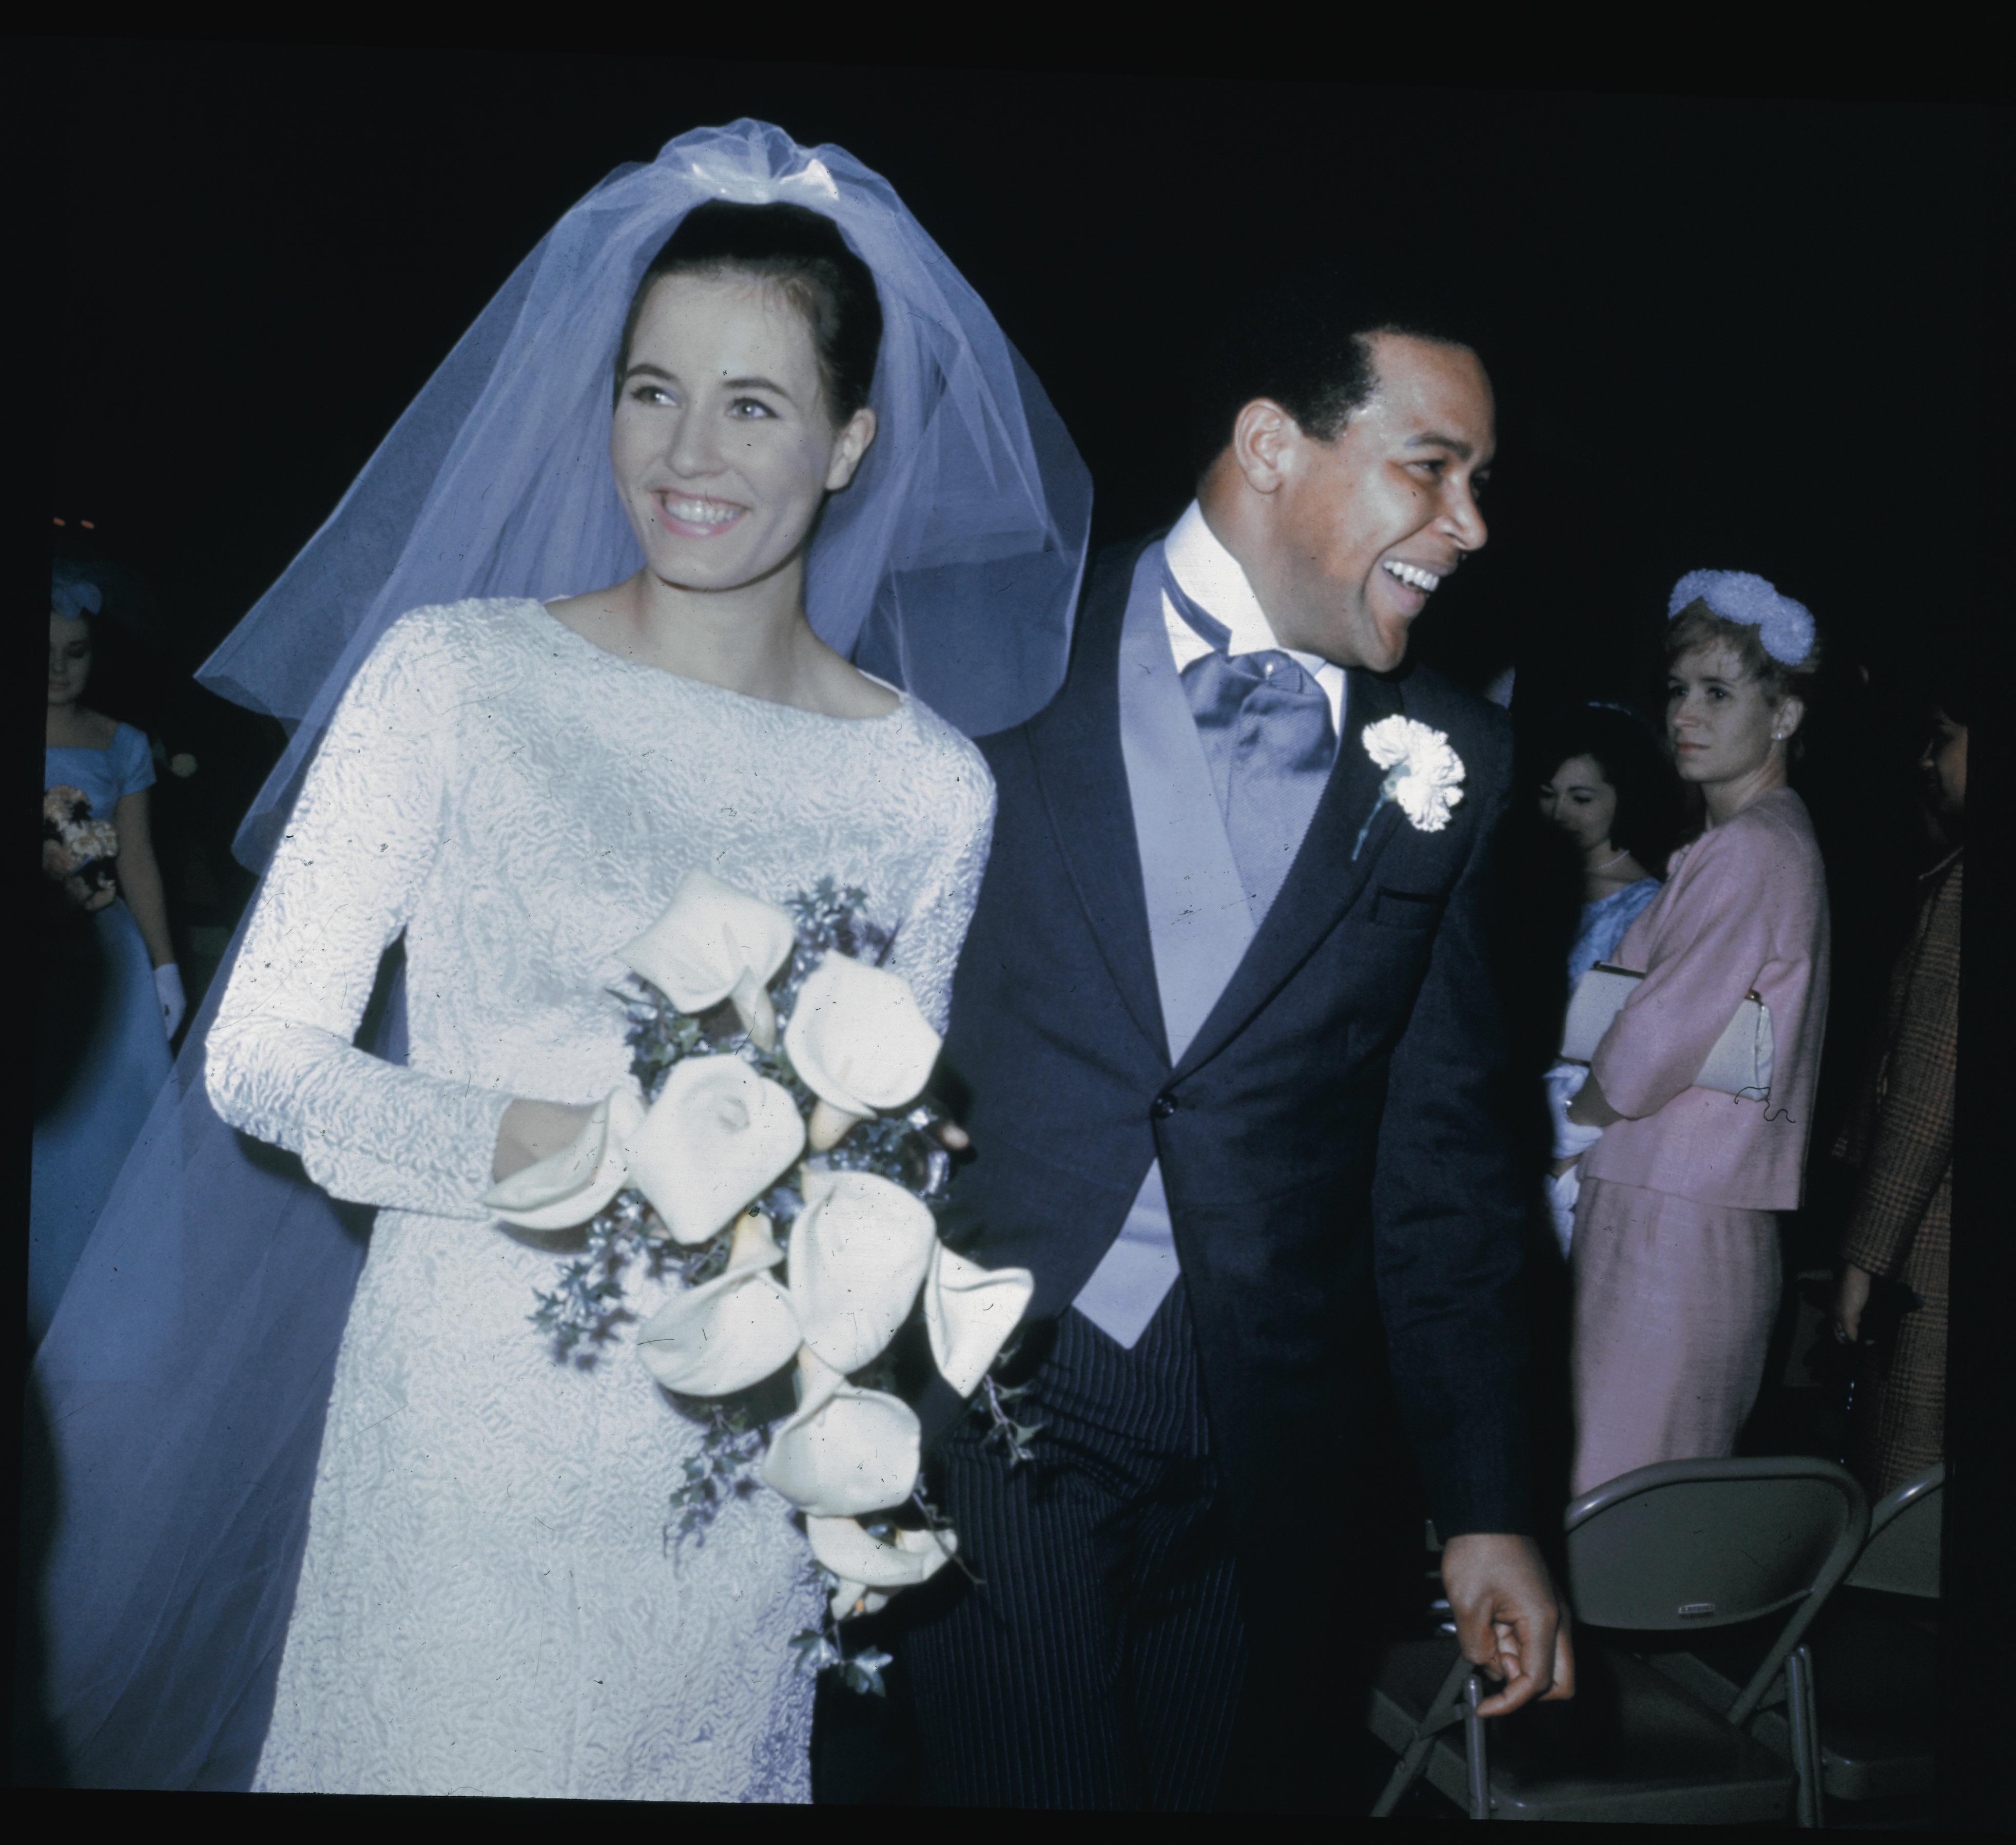 Catharina Lodders and Chubby Checker during their wedding on April 12, 1964, in Pennsauken, New Jersey. | Source: Getty Images